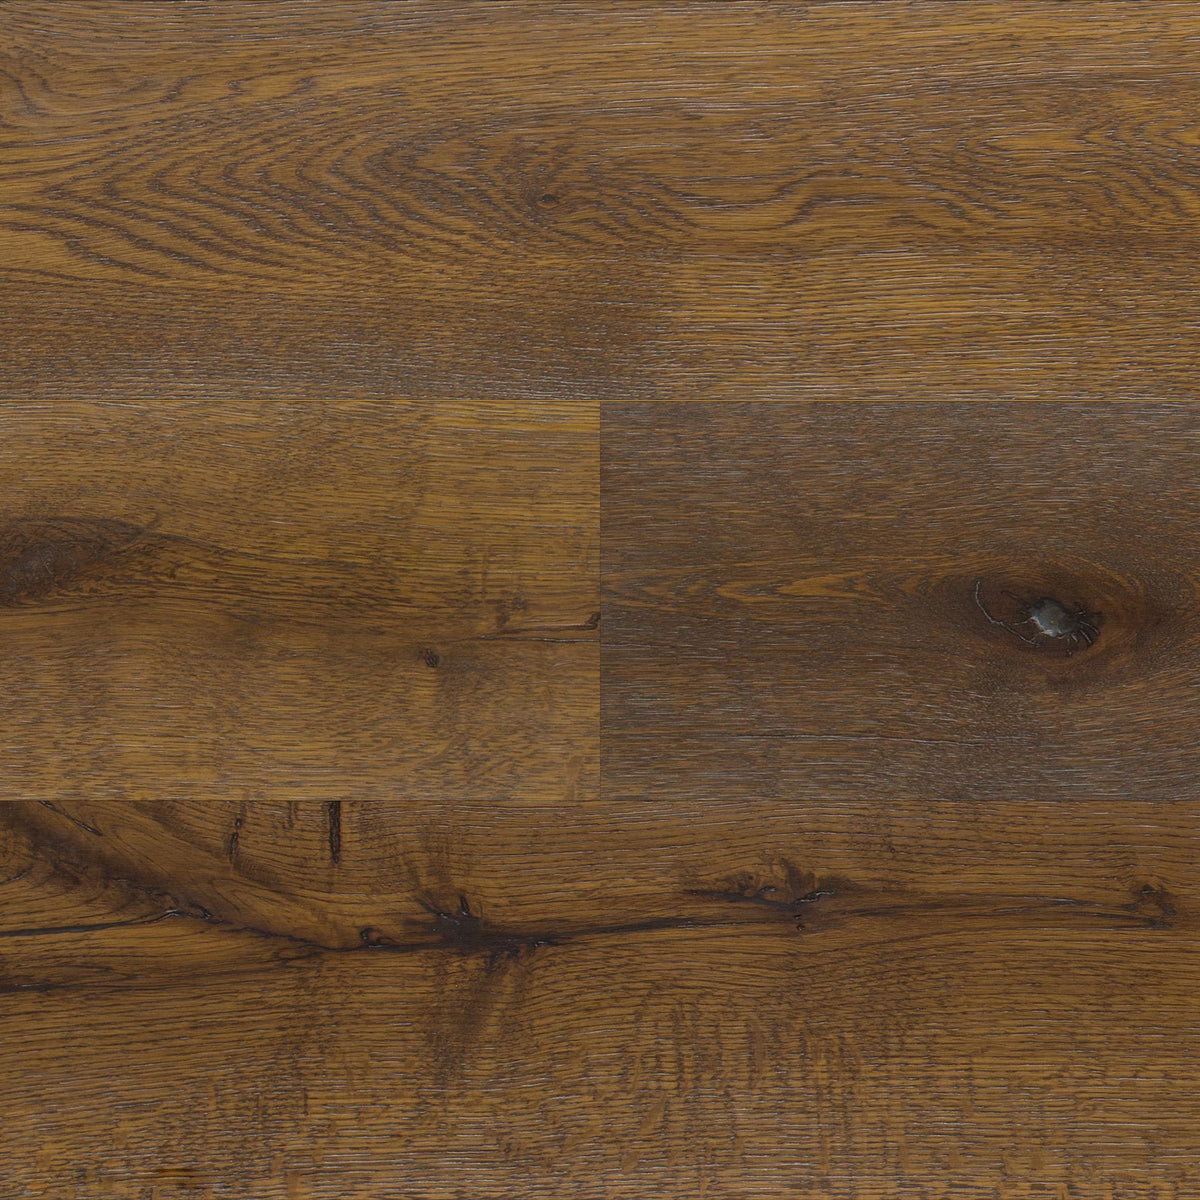 Naturally Aged Flooring - Medallion Collection - Rushmore